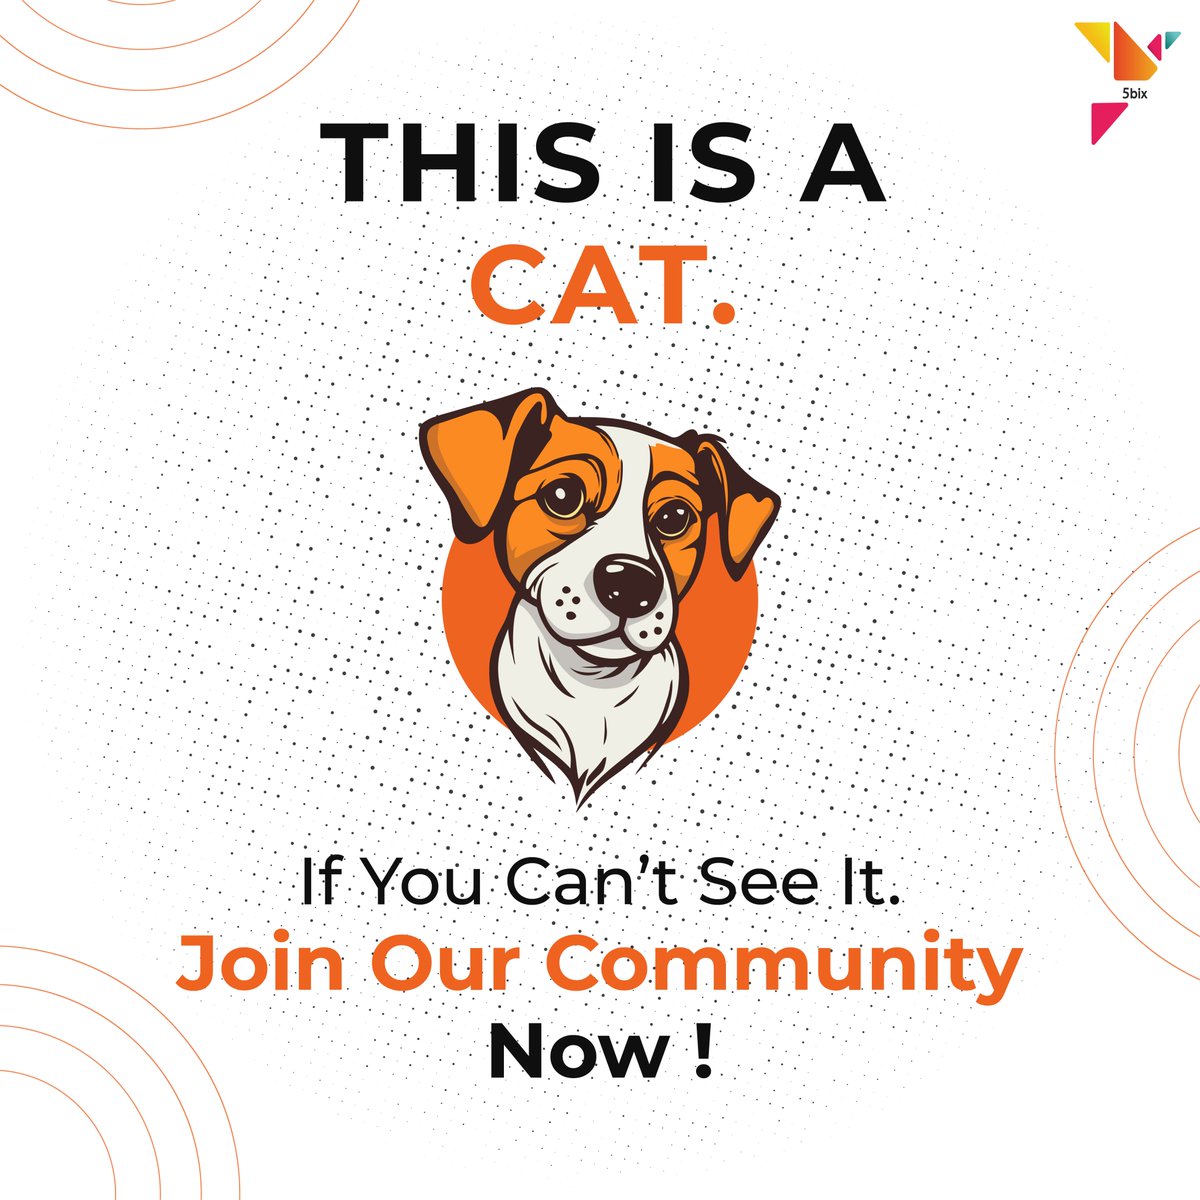 If you're reading this post, it means the universe is signalling you to join our community...

And become a member of 🚀 India's Fast Paced AI community 🤖

Click the Link to join [ chat.whatsapp.com/BCuVHtxZ1xKJRB… ].
.
.
.
#machinelearning #aiandml #aiml #ai #robotics #community